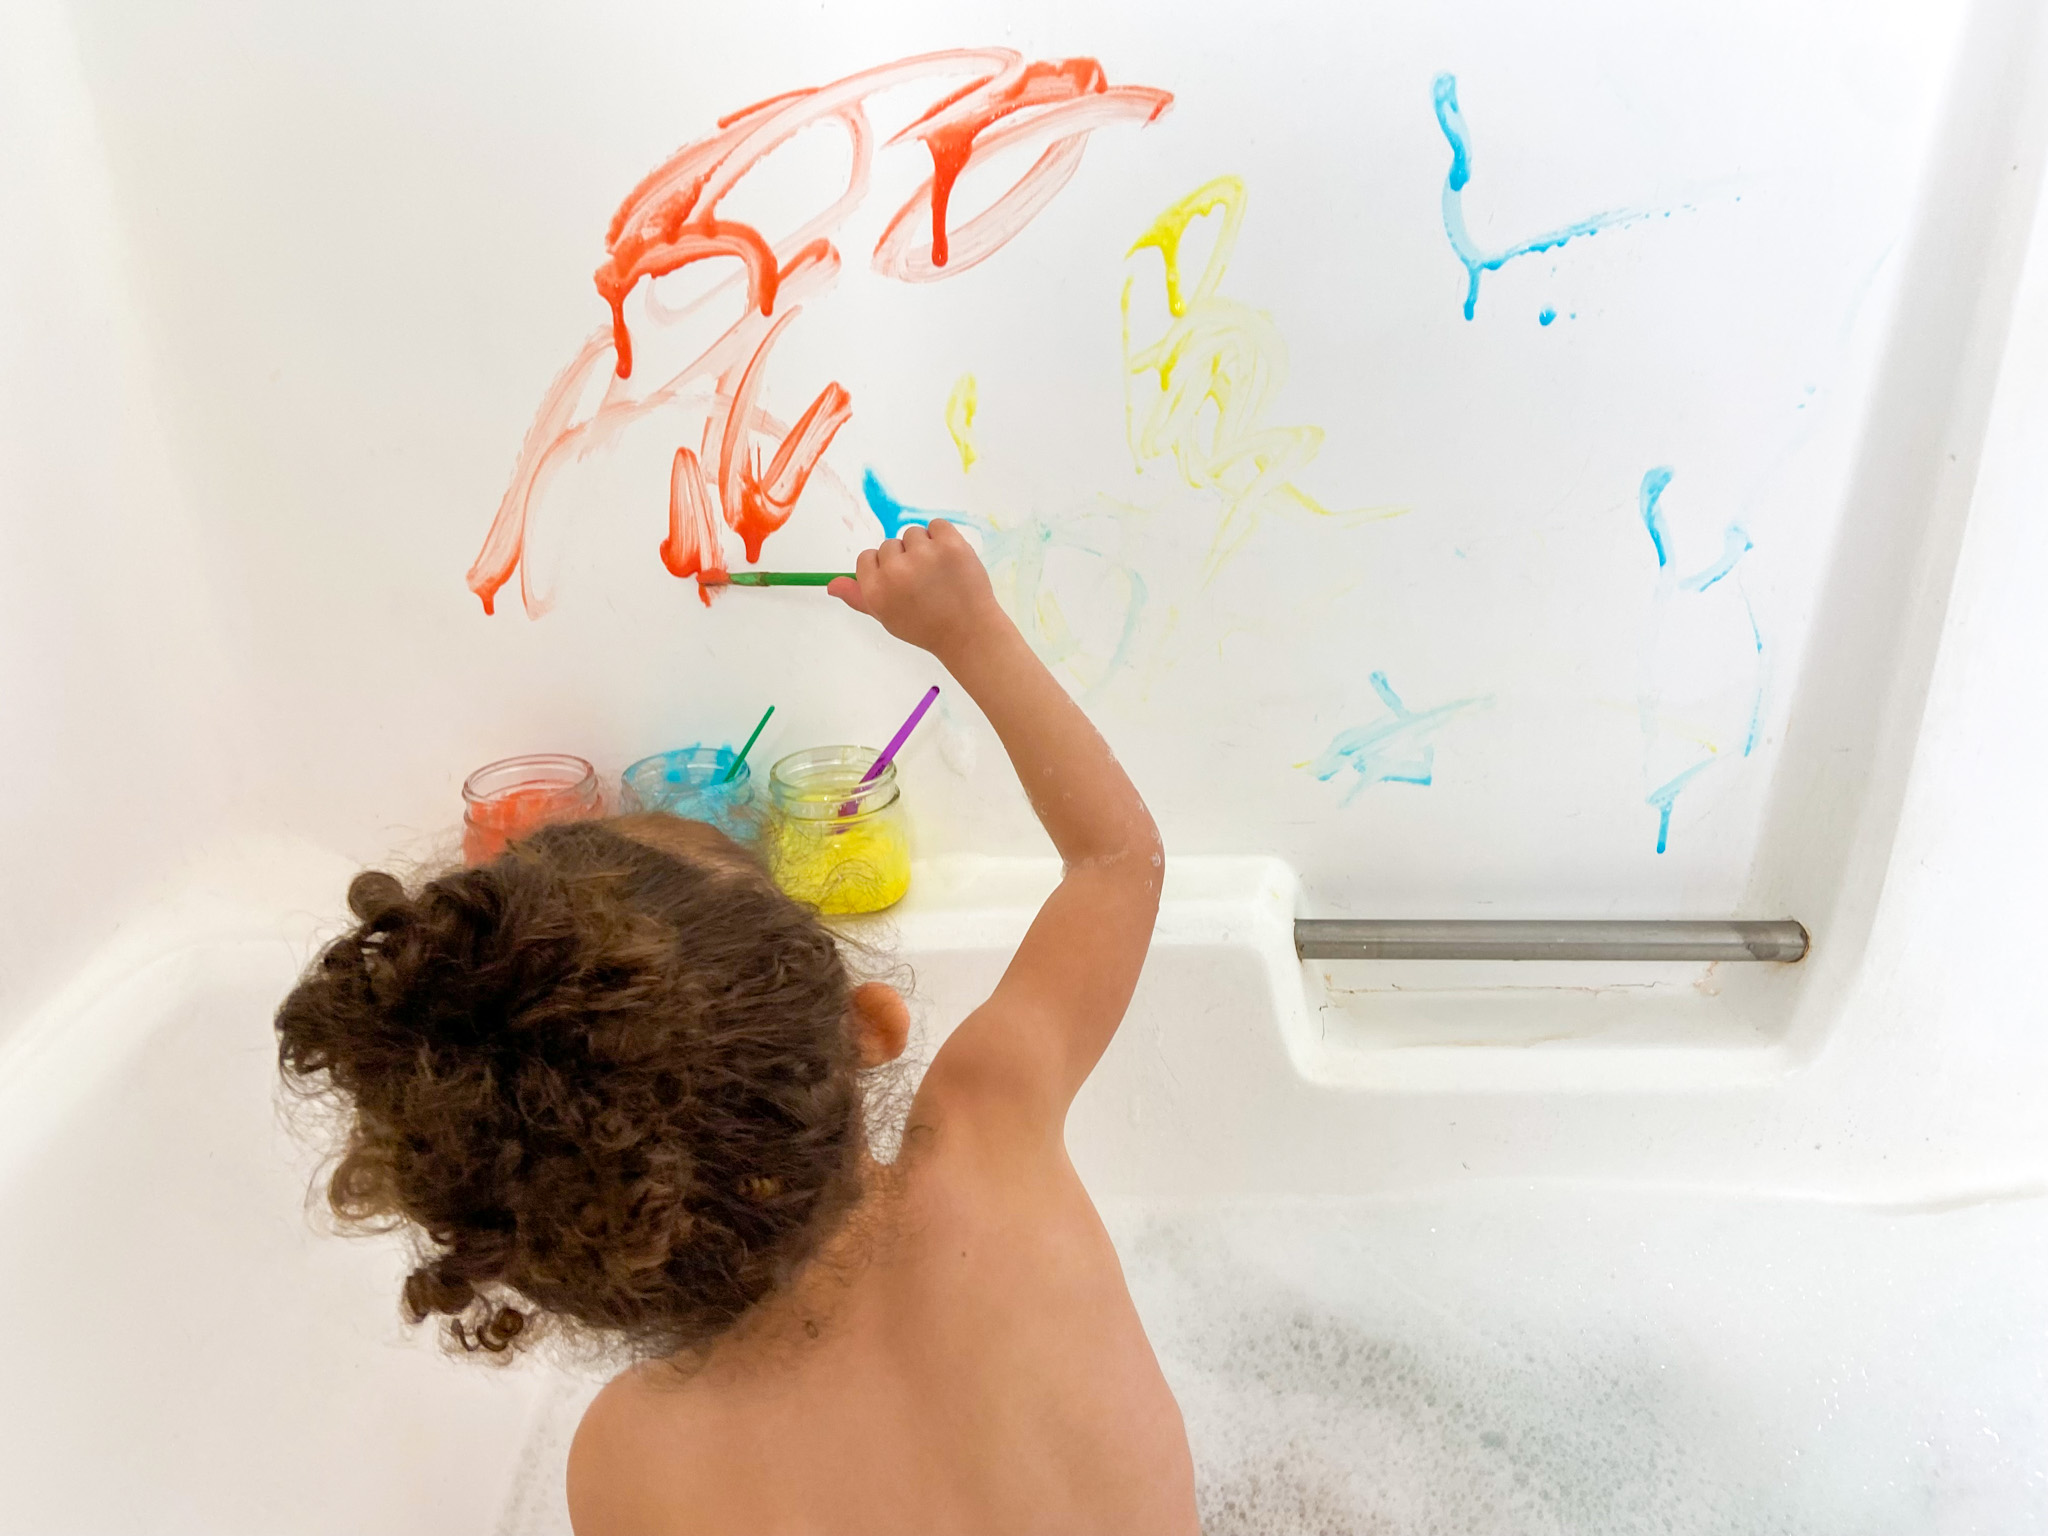 DIY Bath Paint! Great FUN for bath time!only 2 ingredients!